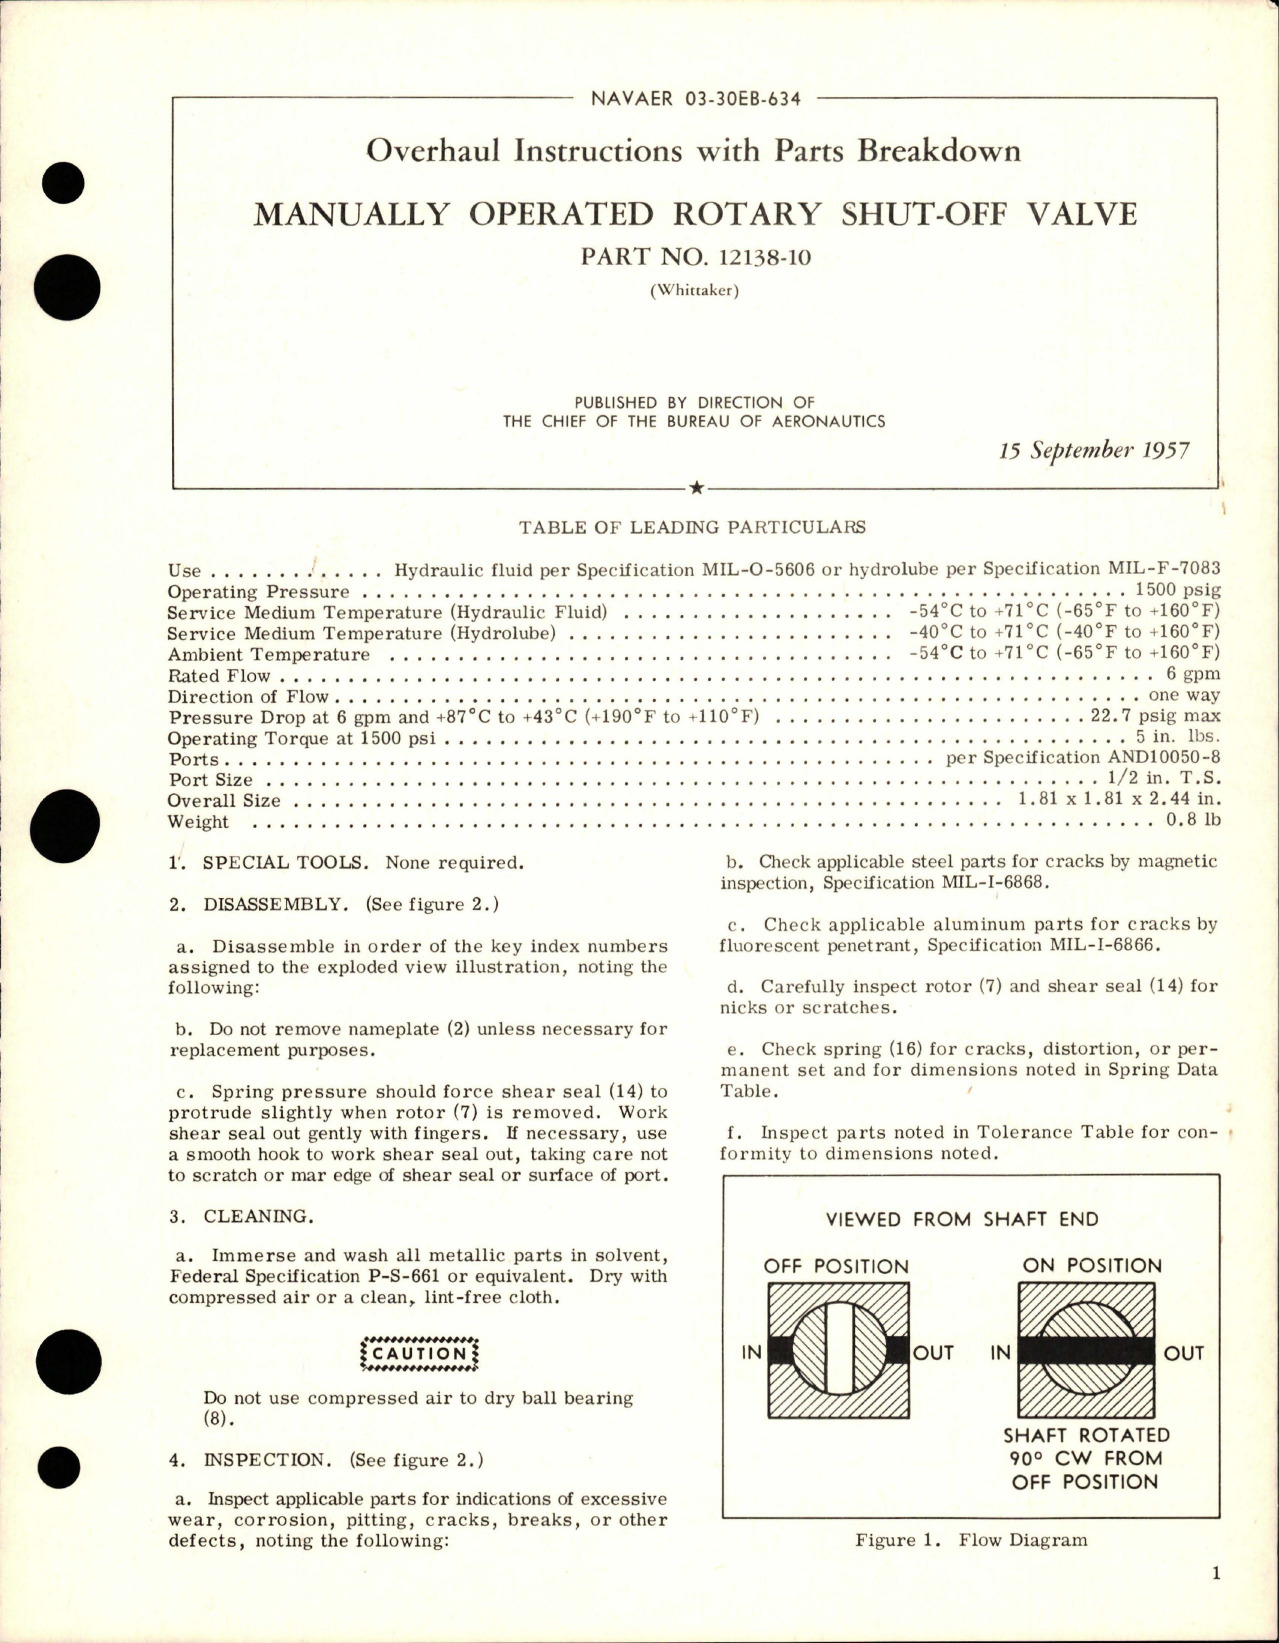 Sample page 1 from AirCorps Library document: Overhaul Instructions with Parts for Manually Operated Rotary Shut Off Valve - Part 12138-10